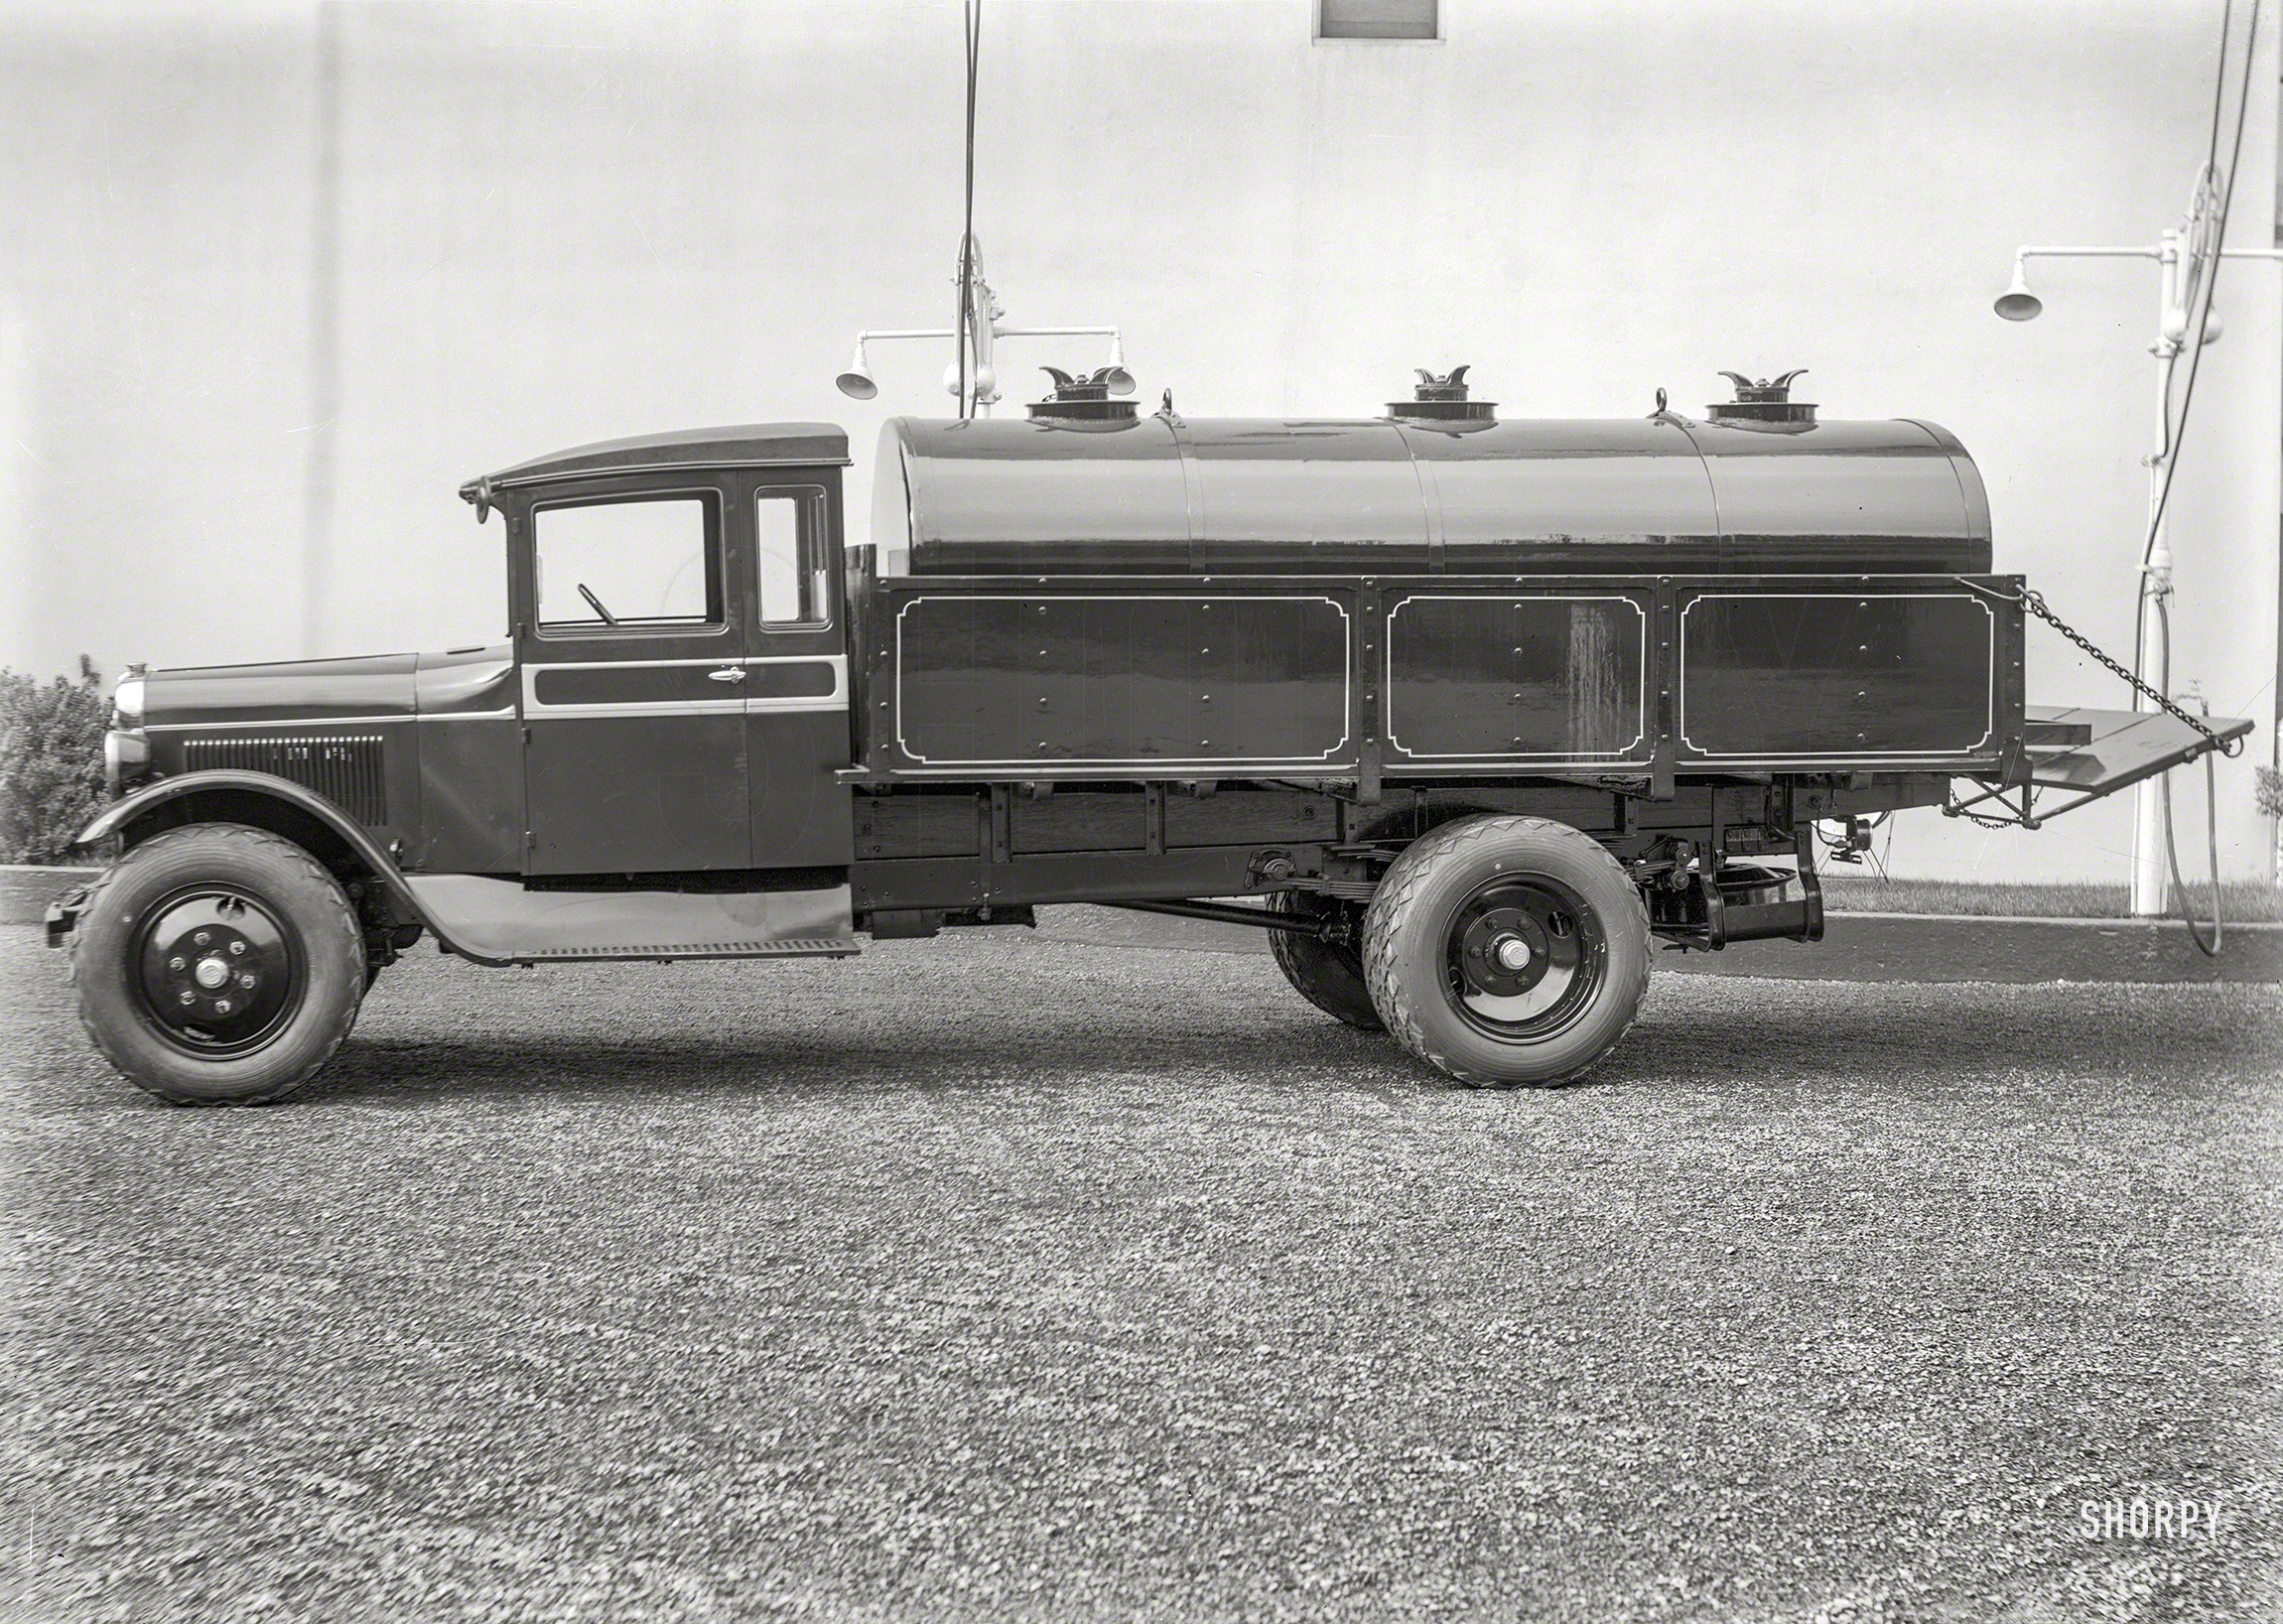 San Francisco circa 1927. "Graham Bros. truck with stake bed body." 5x7 glass negative by Christopher Helin. View full size.